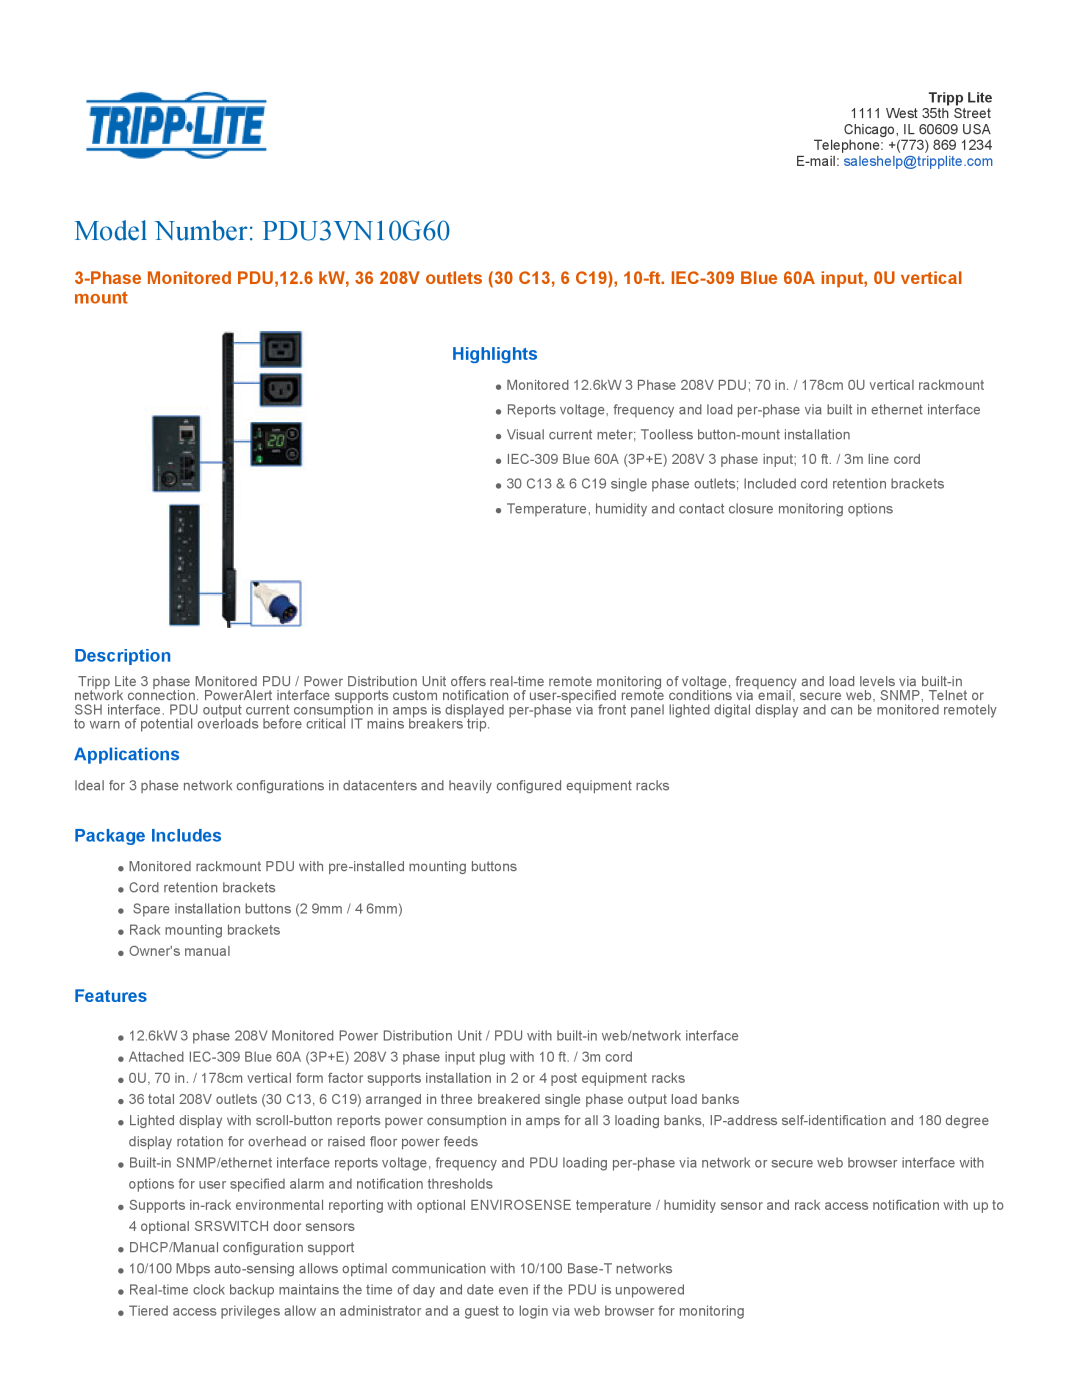 Tripp Lite PDU3VN10G60 owner manual Highlights, Description, Applications, Package Includes, Features 